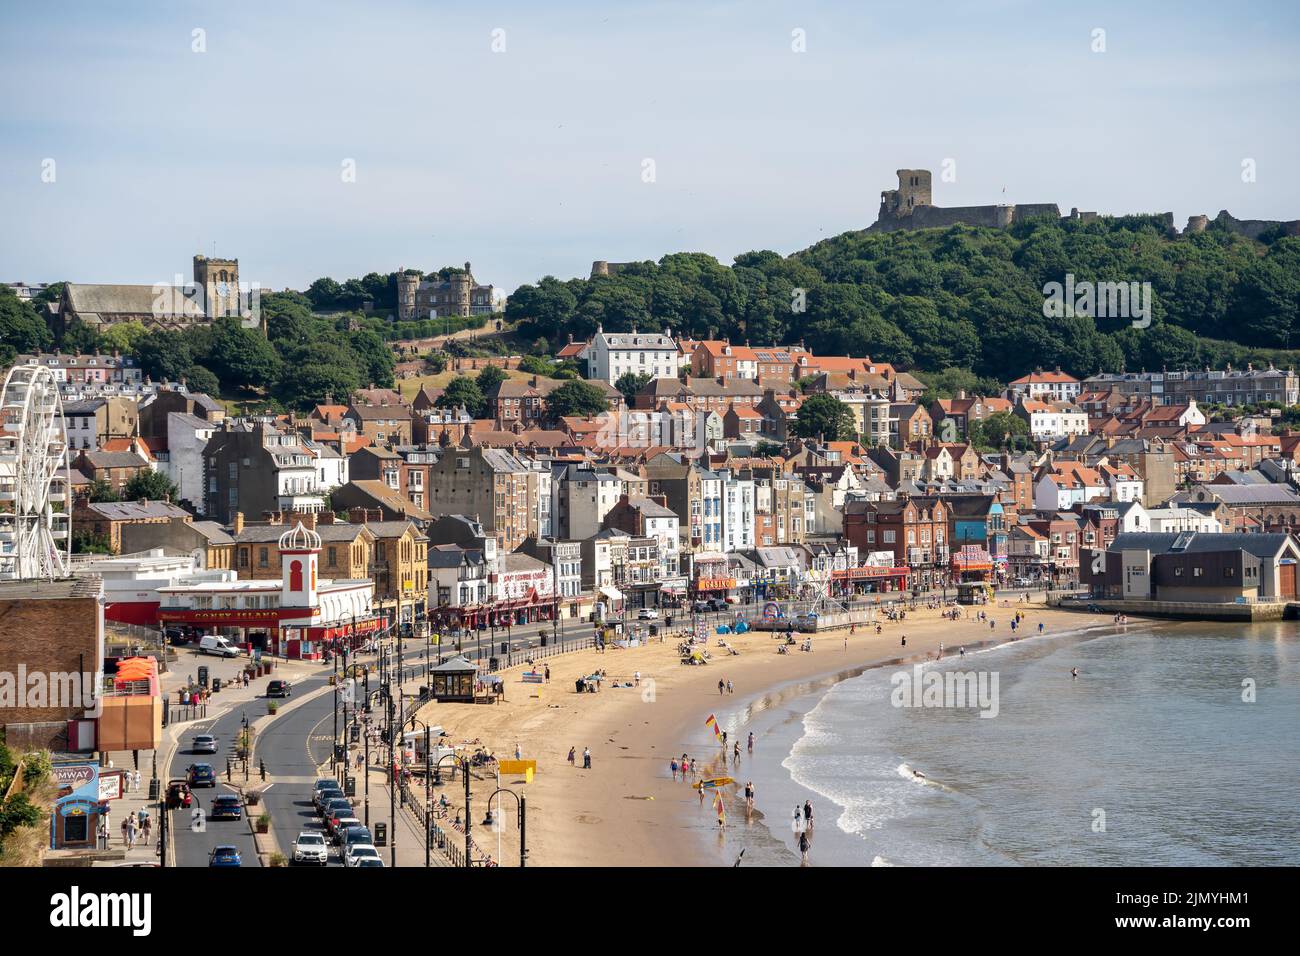 SCARBOROUGH,  NORTH YORKSHIRE, UK - JULY 18: View of the sea front in Scarborough, North Yorkshire on July 18, 2022. Unidentifie Stock Photo